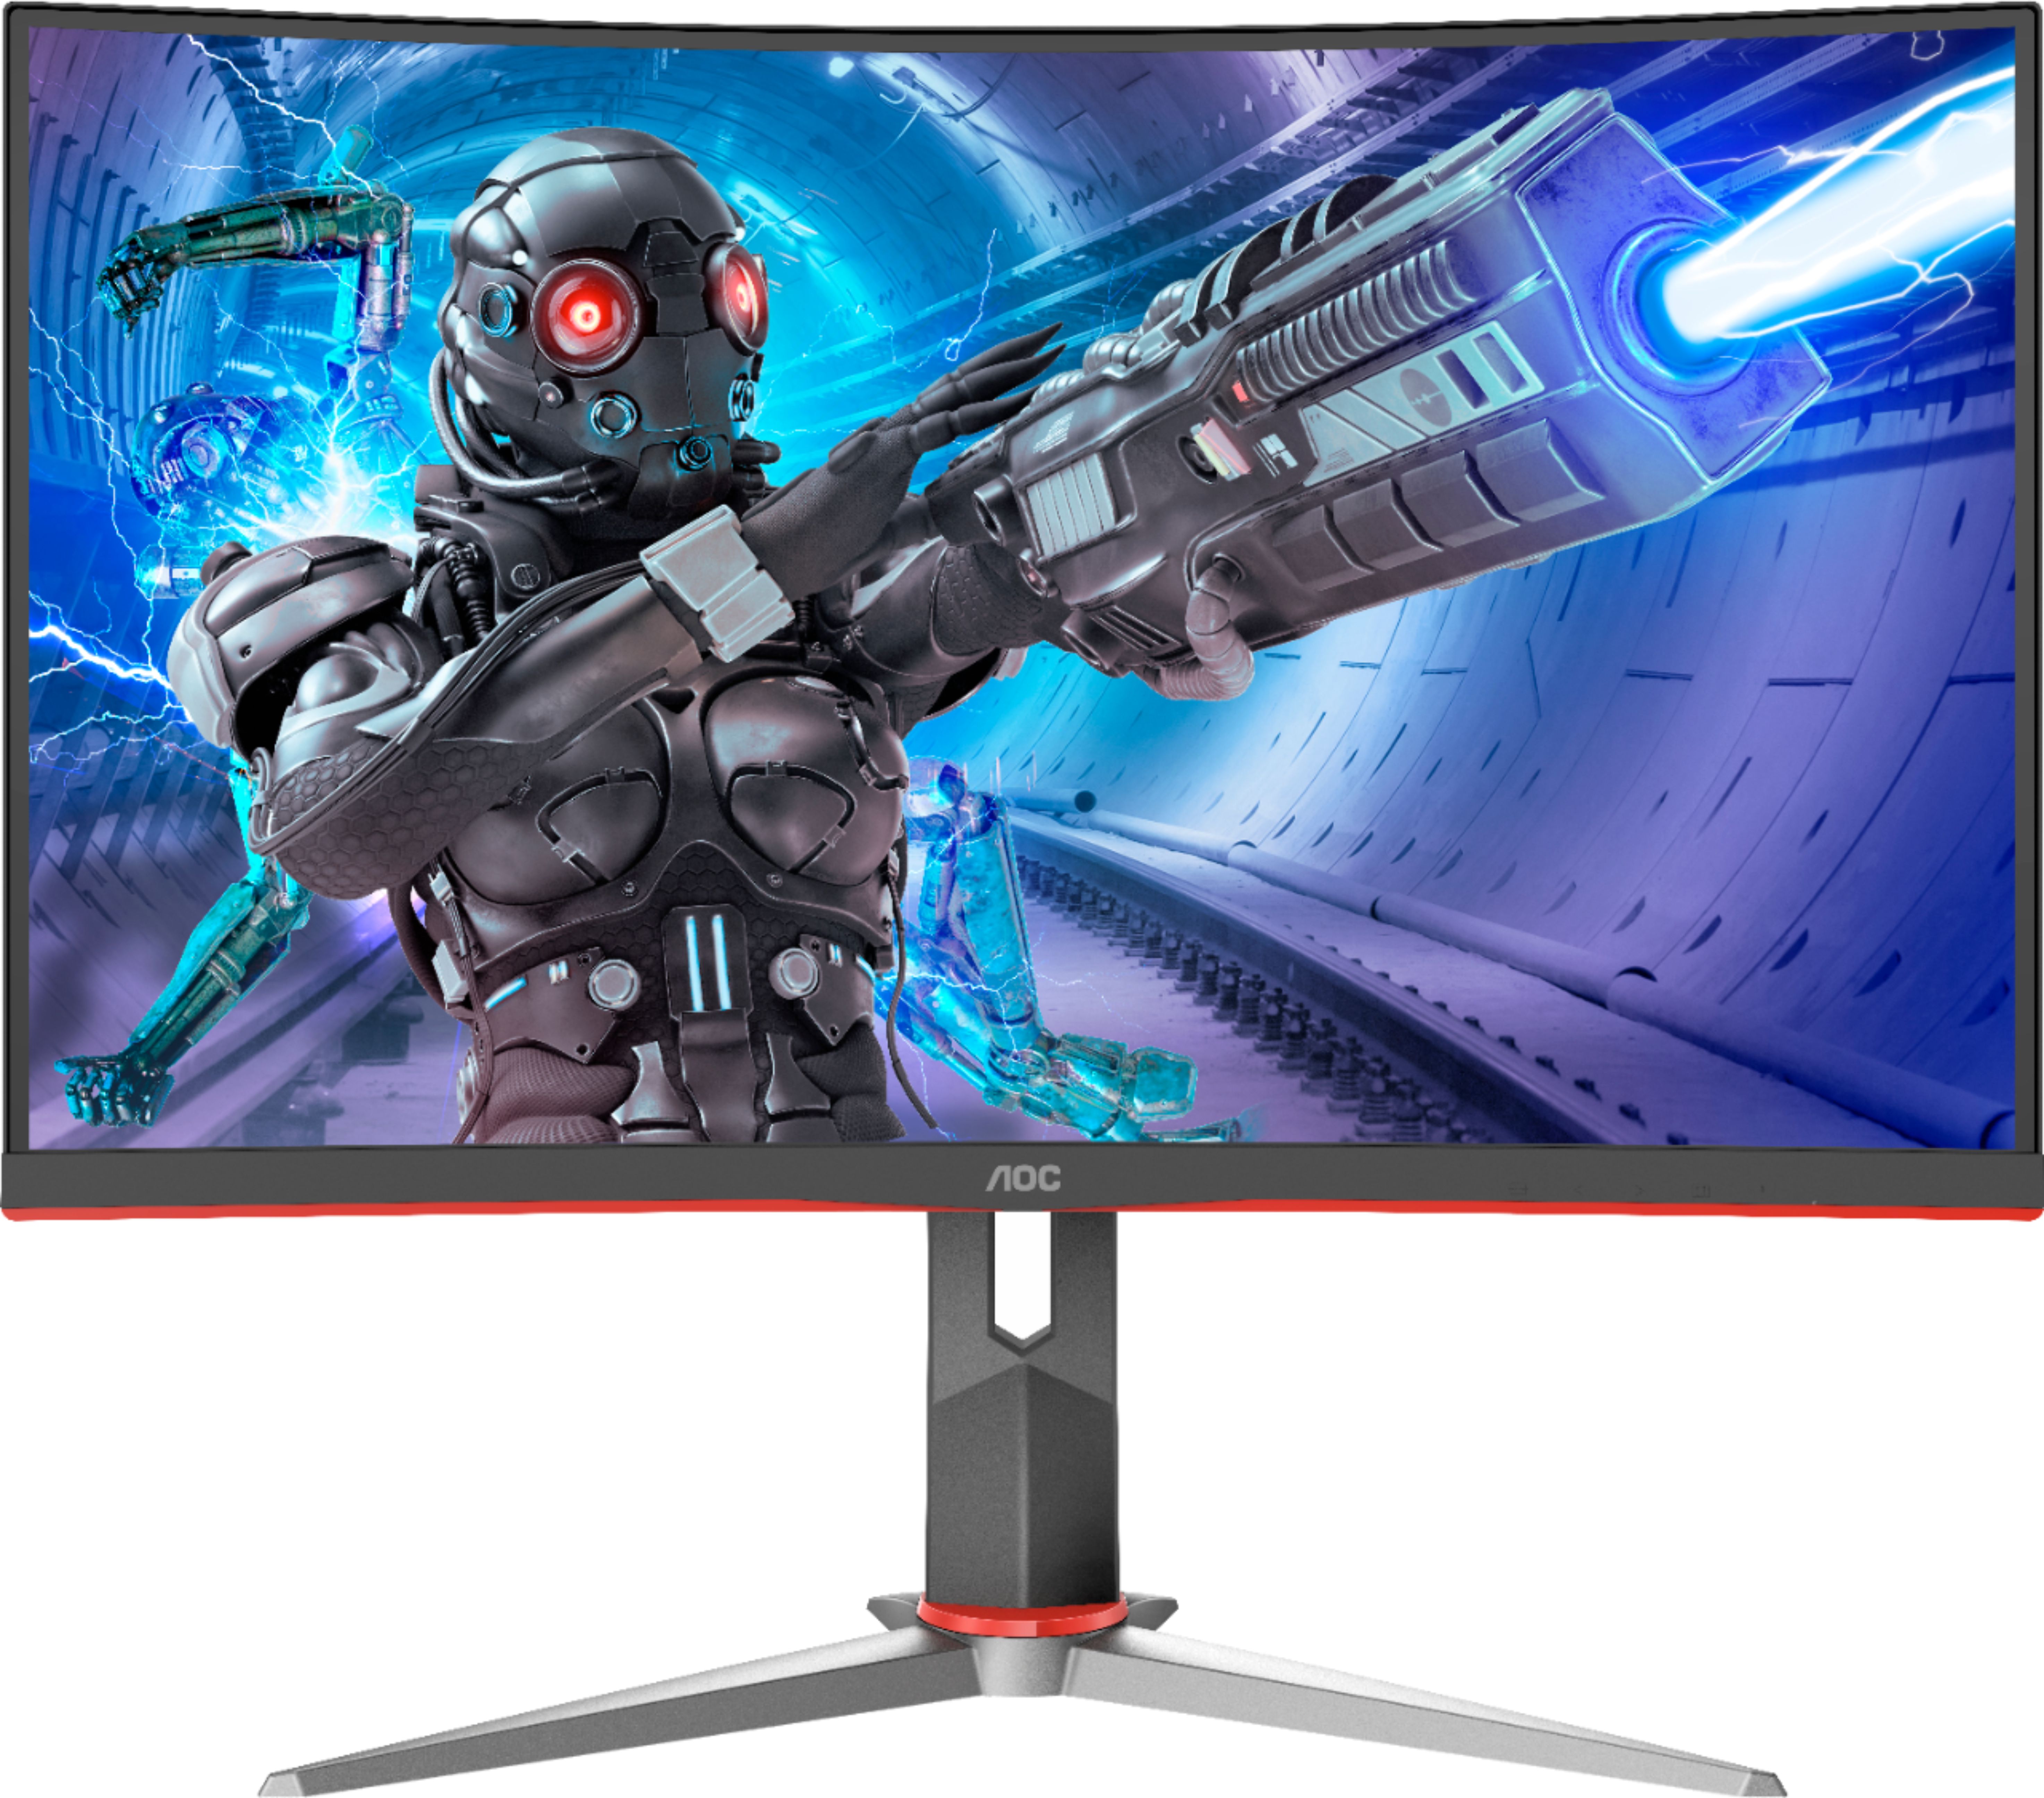 Aoc 27 Led Curved Fhd Freesync Monitor With Hdr Black Red Giftsapp